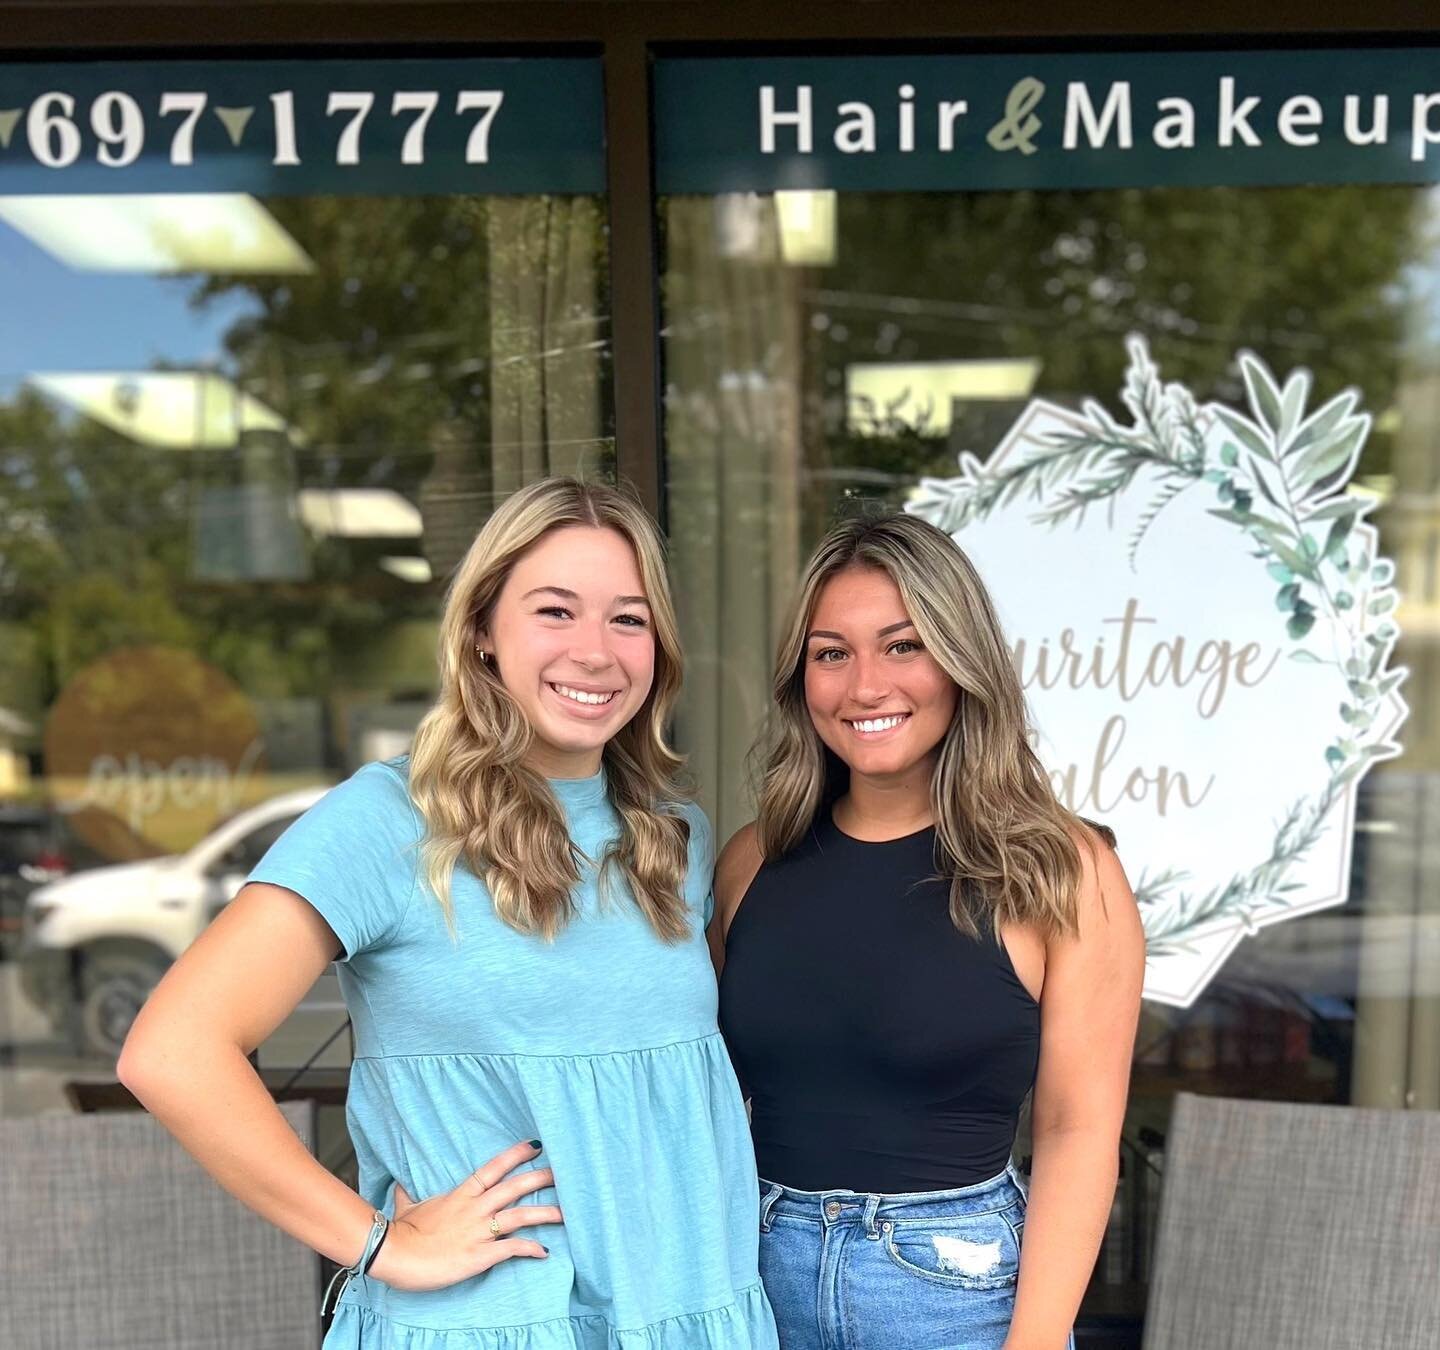 ⚡️Employee Spotlight ⚡️

Meet our Assistants/Receptionists, Rachel and Hailey! 🌿

Rachel has been with Hairitage for over a year now as an assistant/receptionist. She will be a senior at Northampton High School this fall and plans on pursuing a care